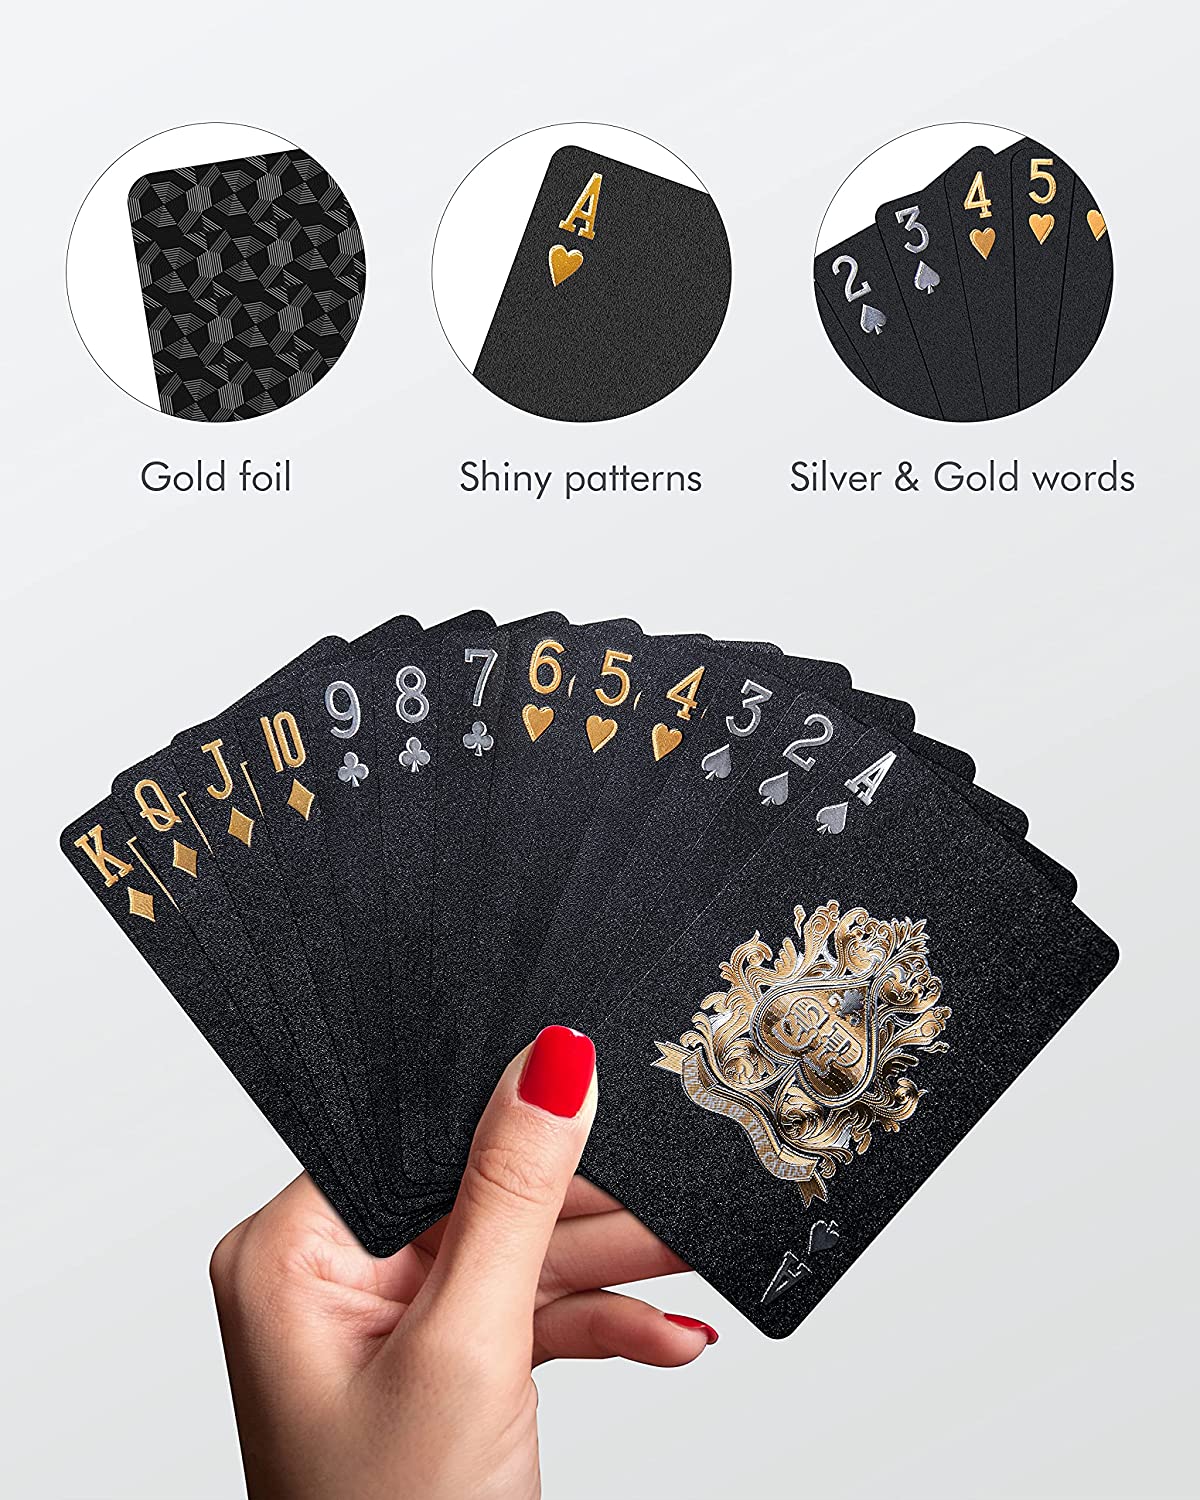 Black Matte Magic Waterproof Non Slippery Deck of Poker Cards with No Art Premium Quality 24K Gold and Silver Plated Replica Bills 5